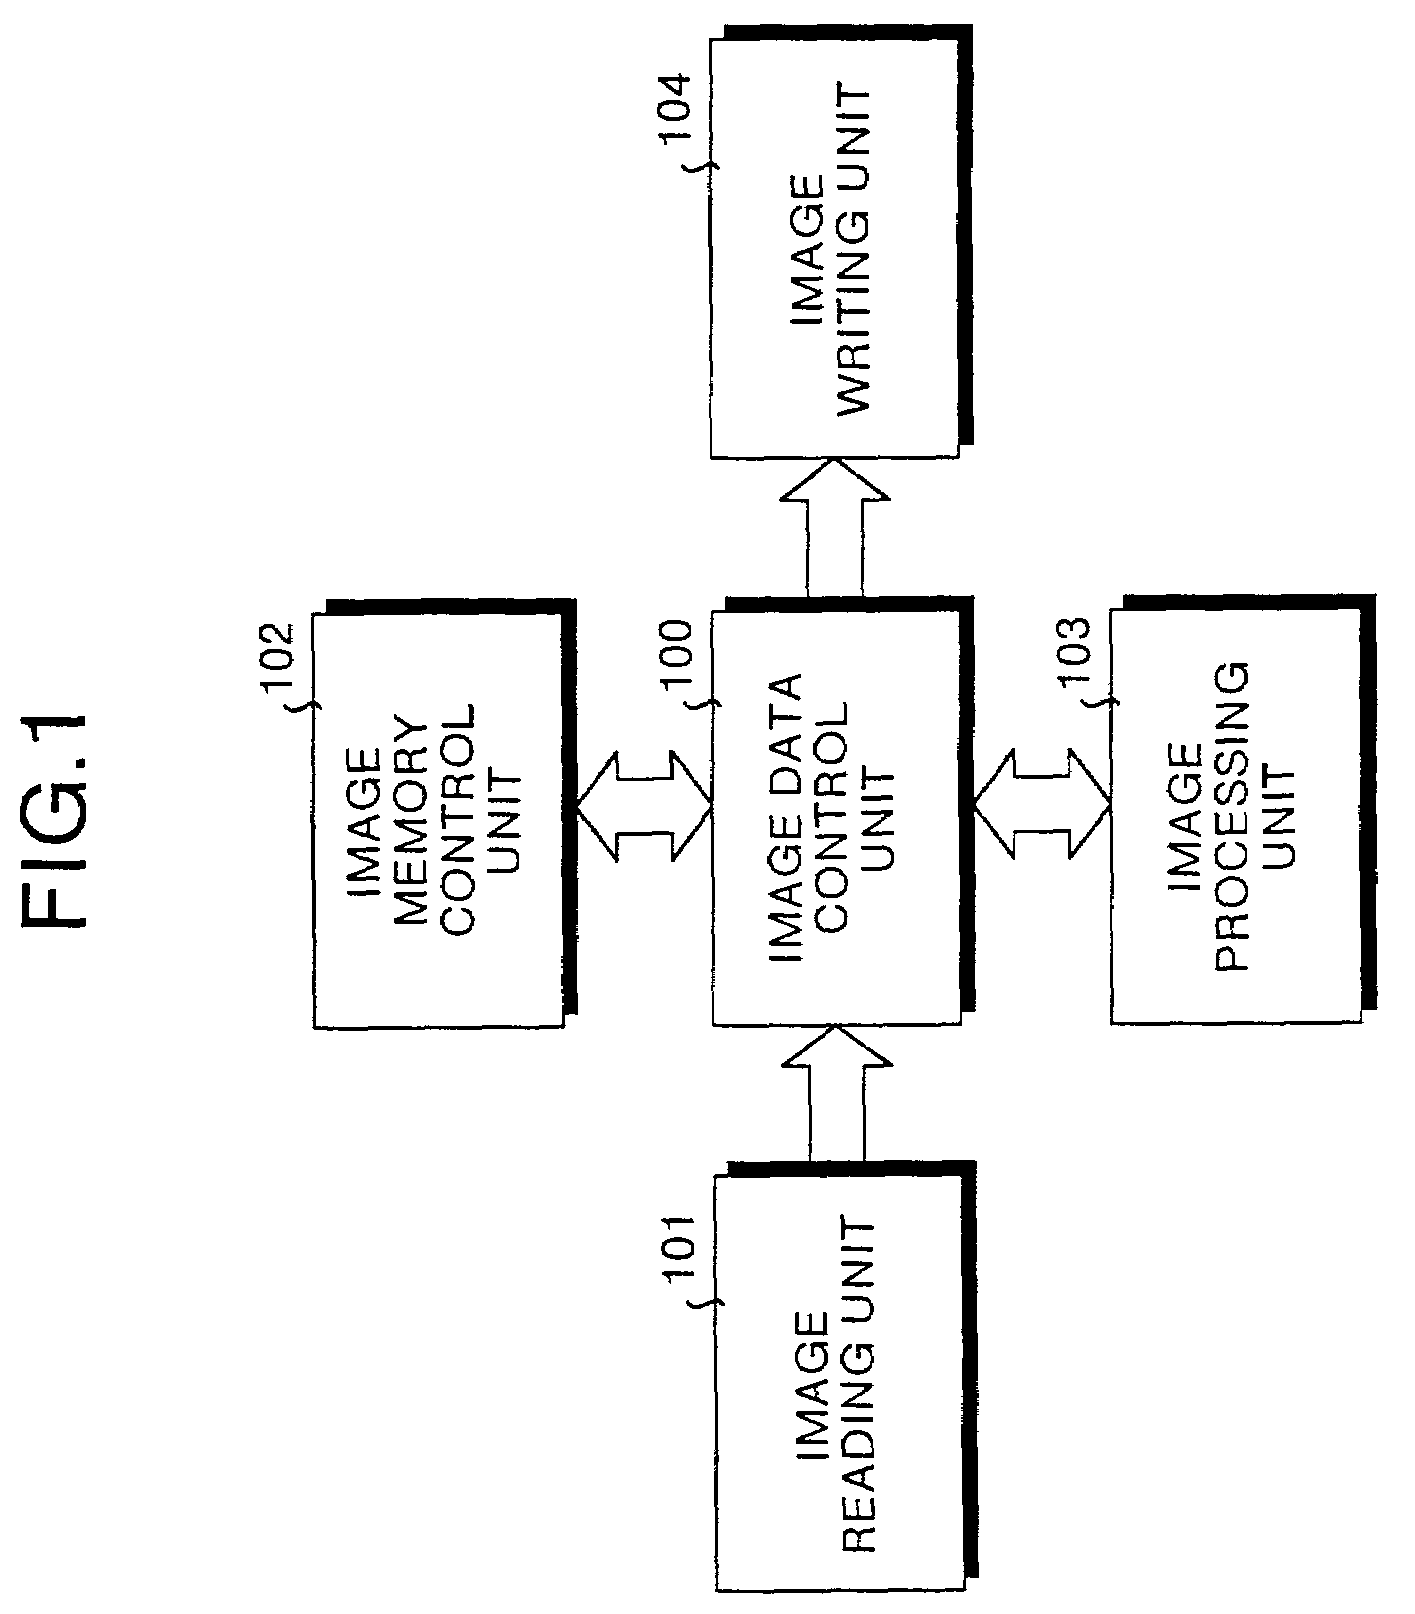 Method and apparatus for image processing, and a computer product